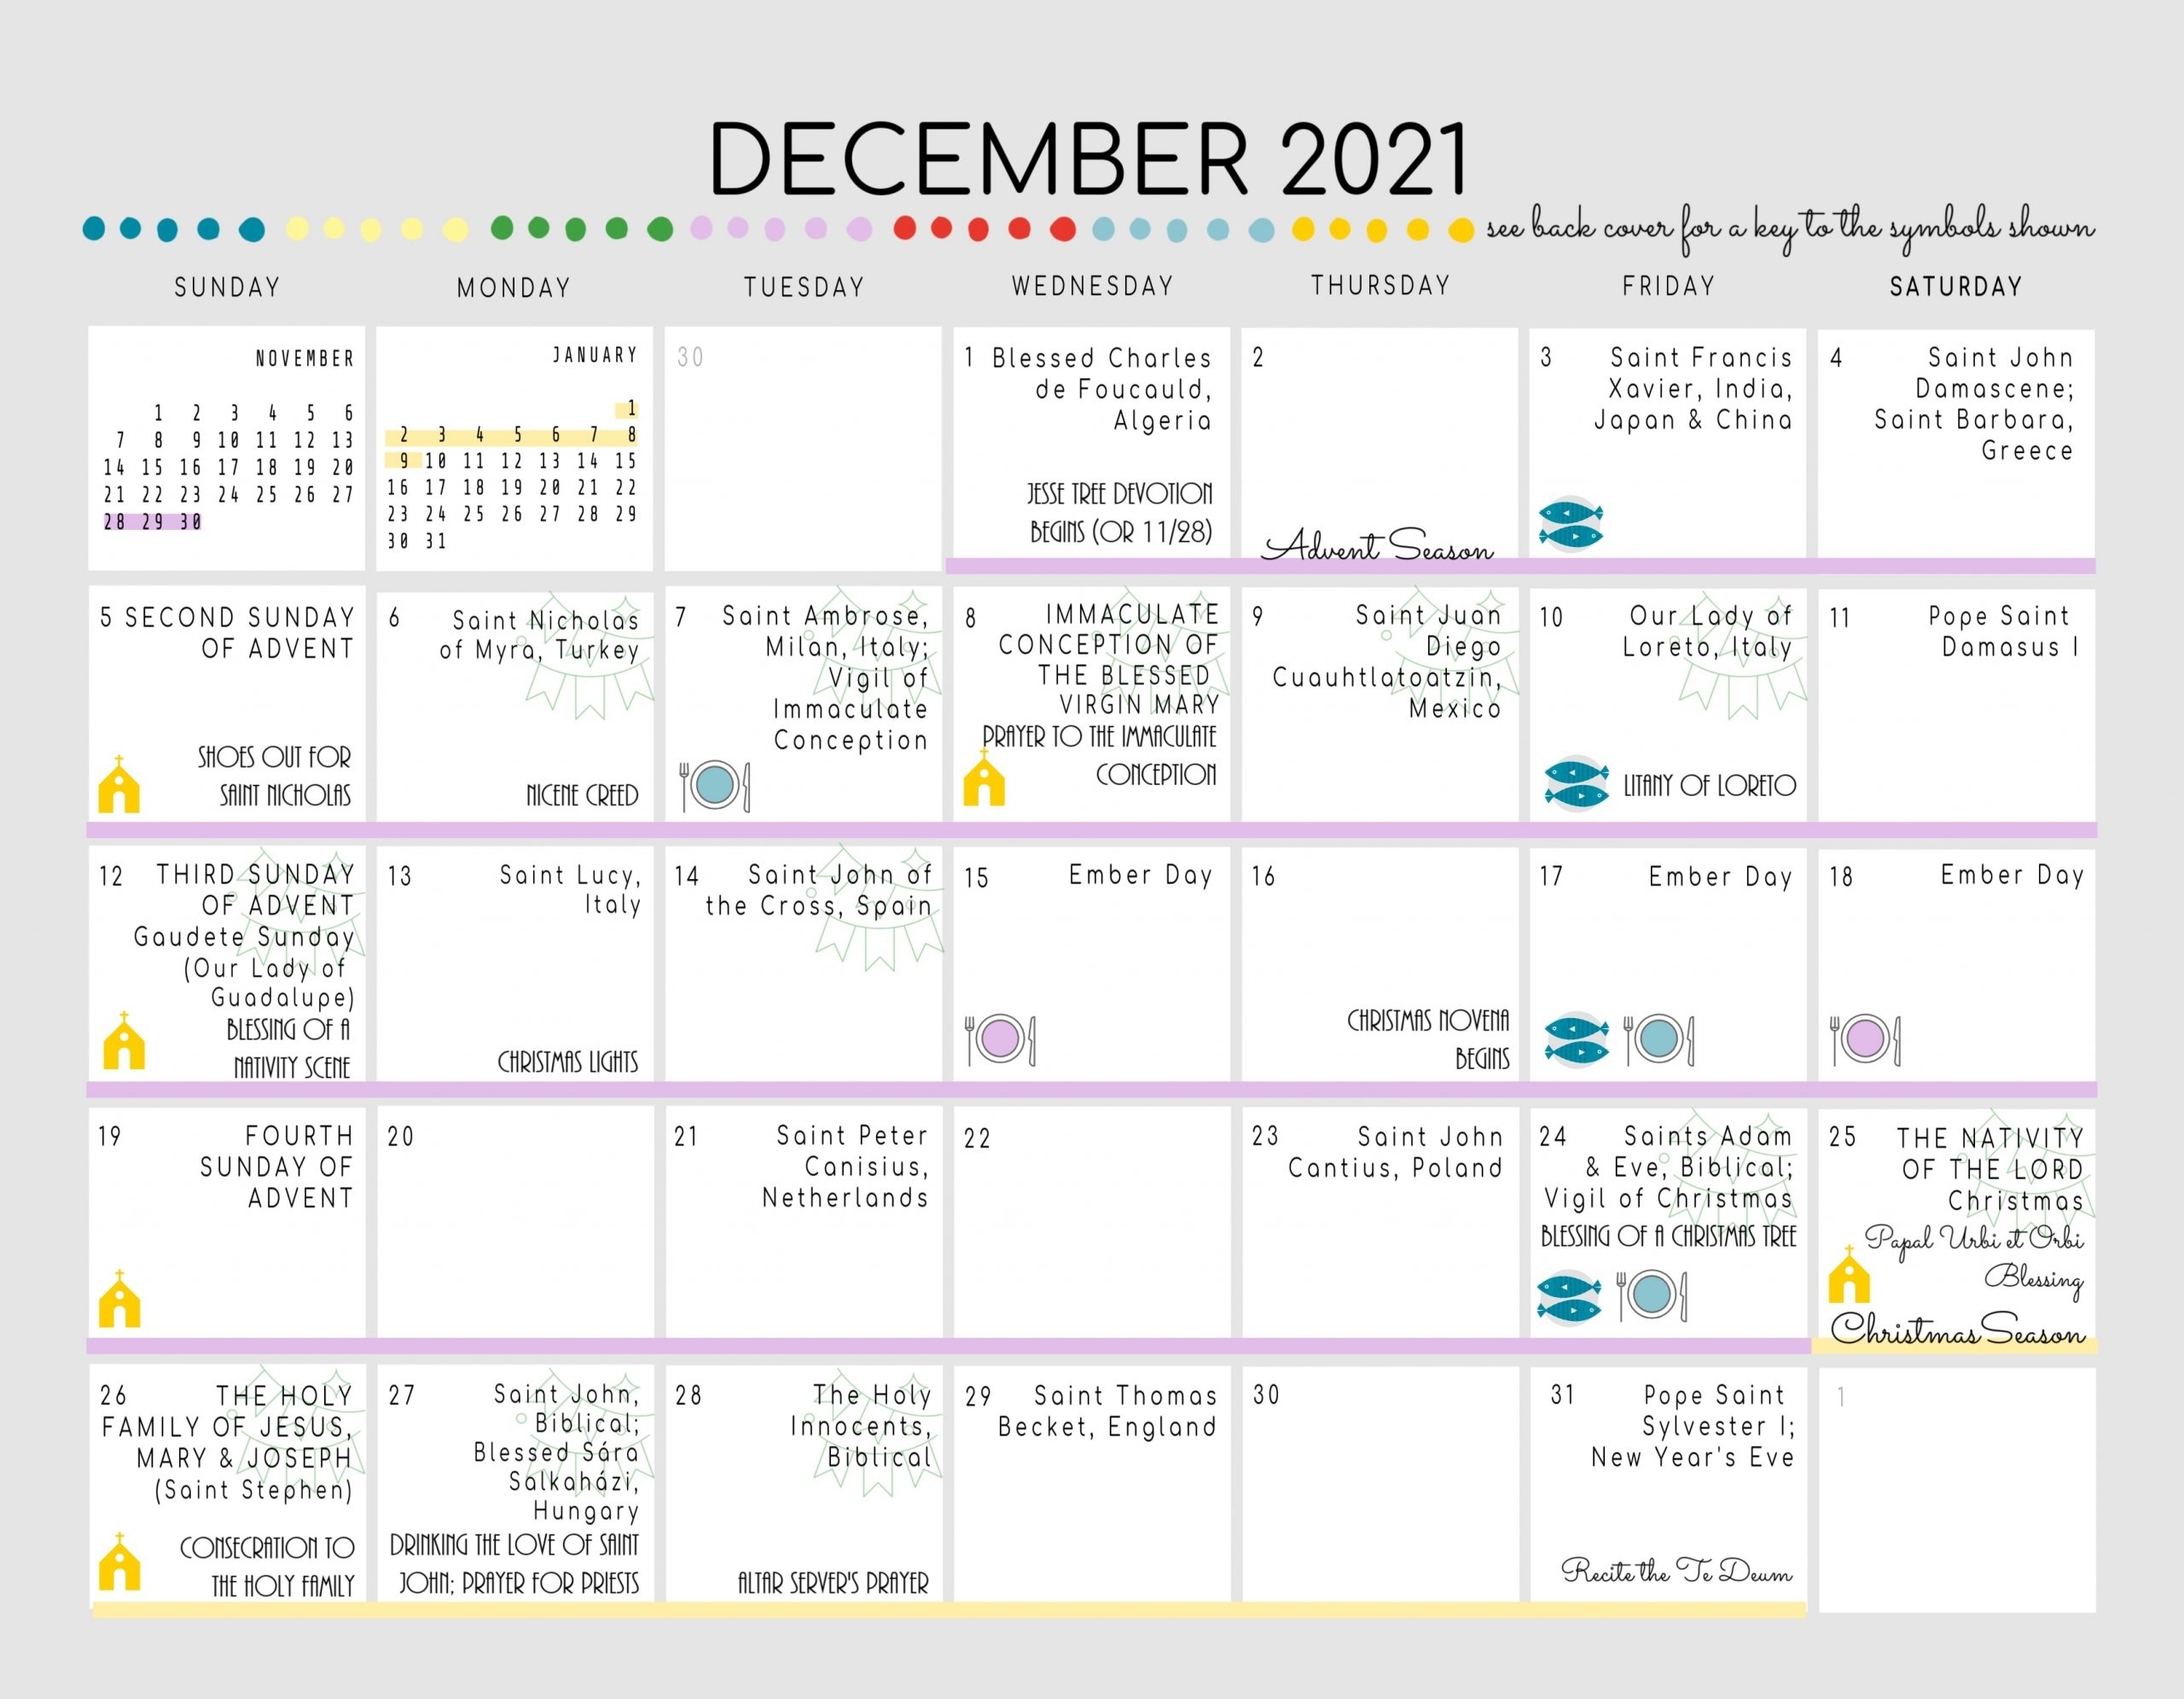 Catholic All Year 2021 Liturgical Calendar With Nrsvce Scripture Quotes *Digital Download View Calendar Of December 2021